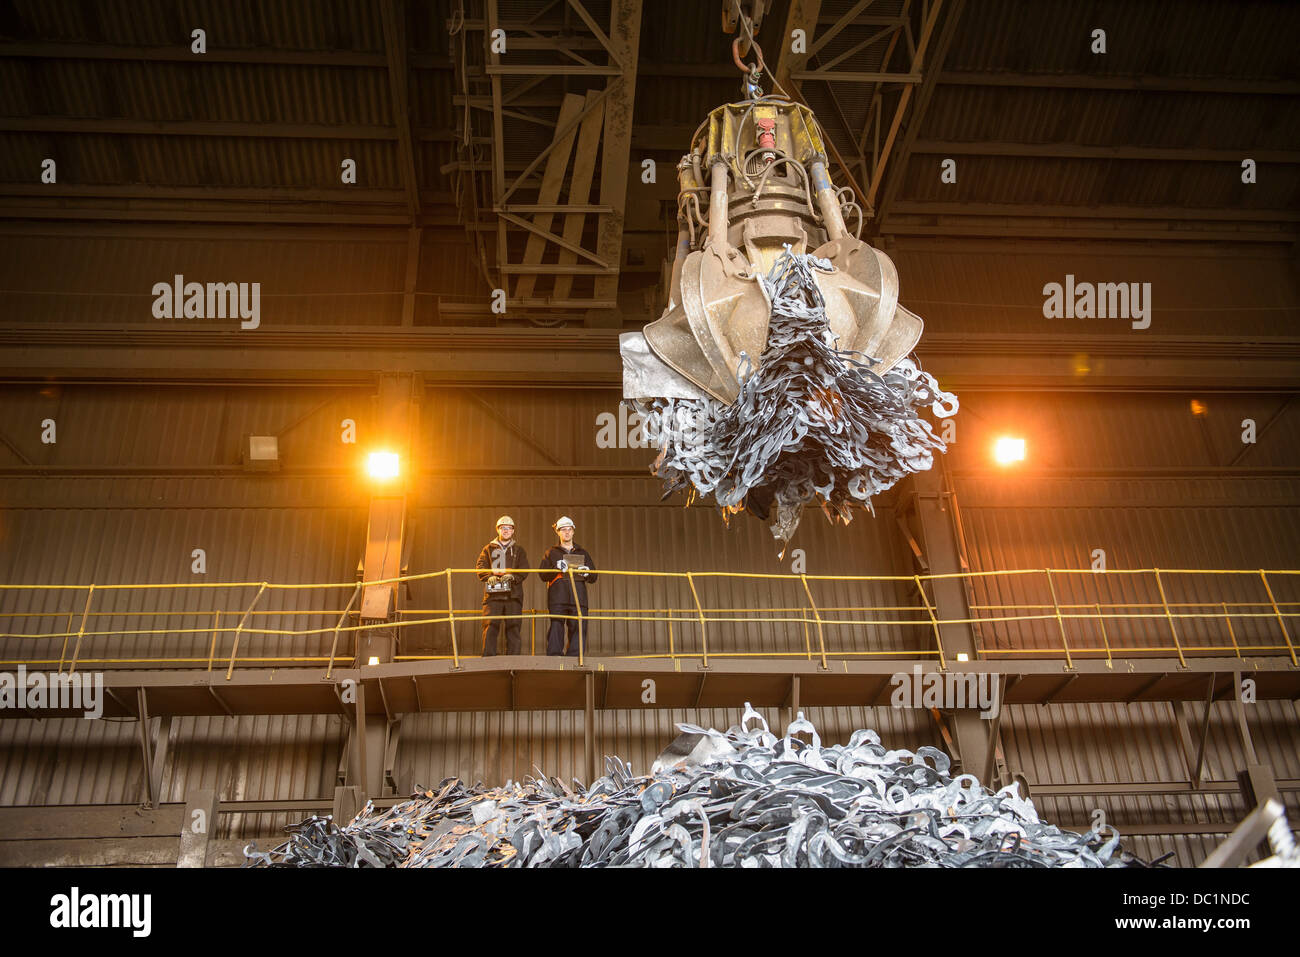 Steel workers watching mechanical grabber in steel foundry Stock Photo